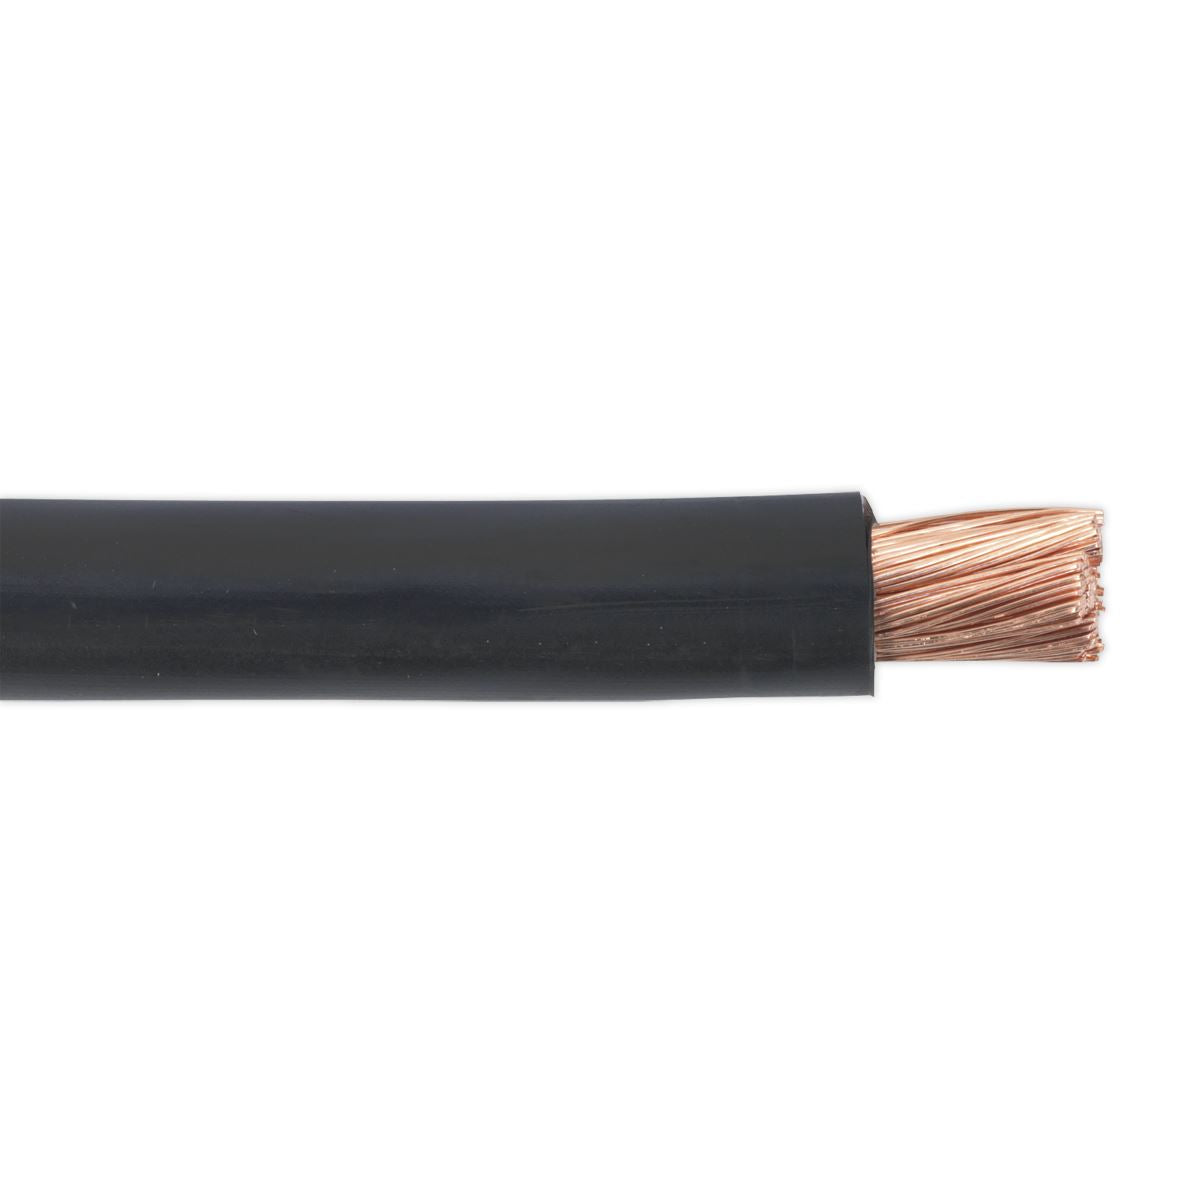 Sealey Automotive Starter Cable 315/0.40mm 40mm² 300A 10m Black